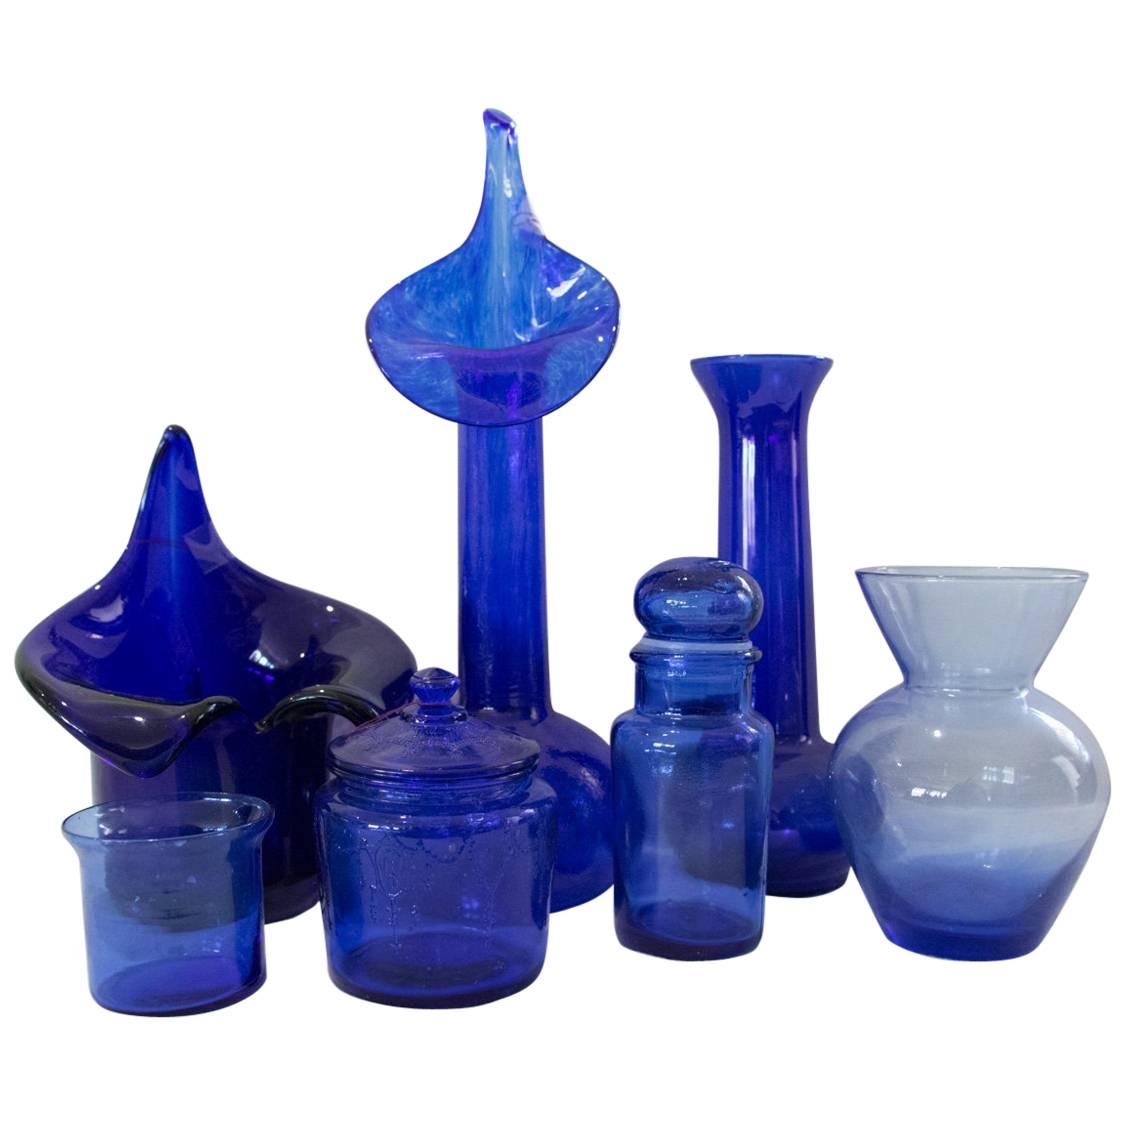 Set of Seven Glorious Blue Glass Vases Mixed Shaped Sizes and Designs Handblown